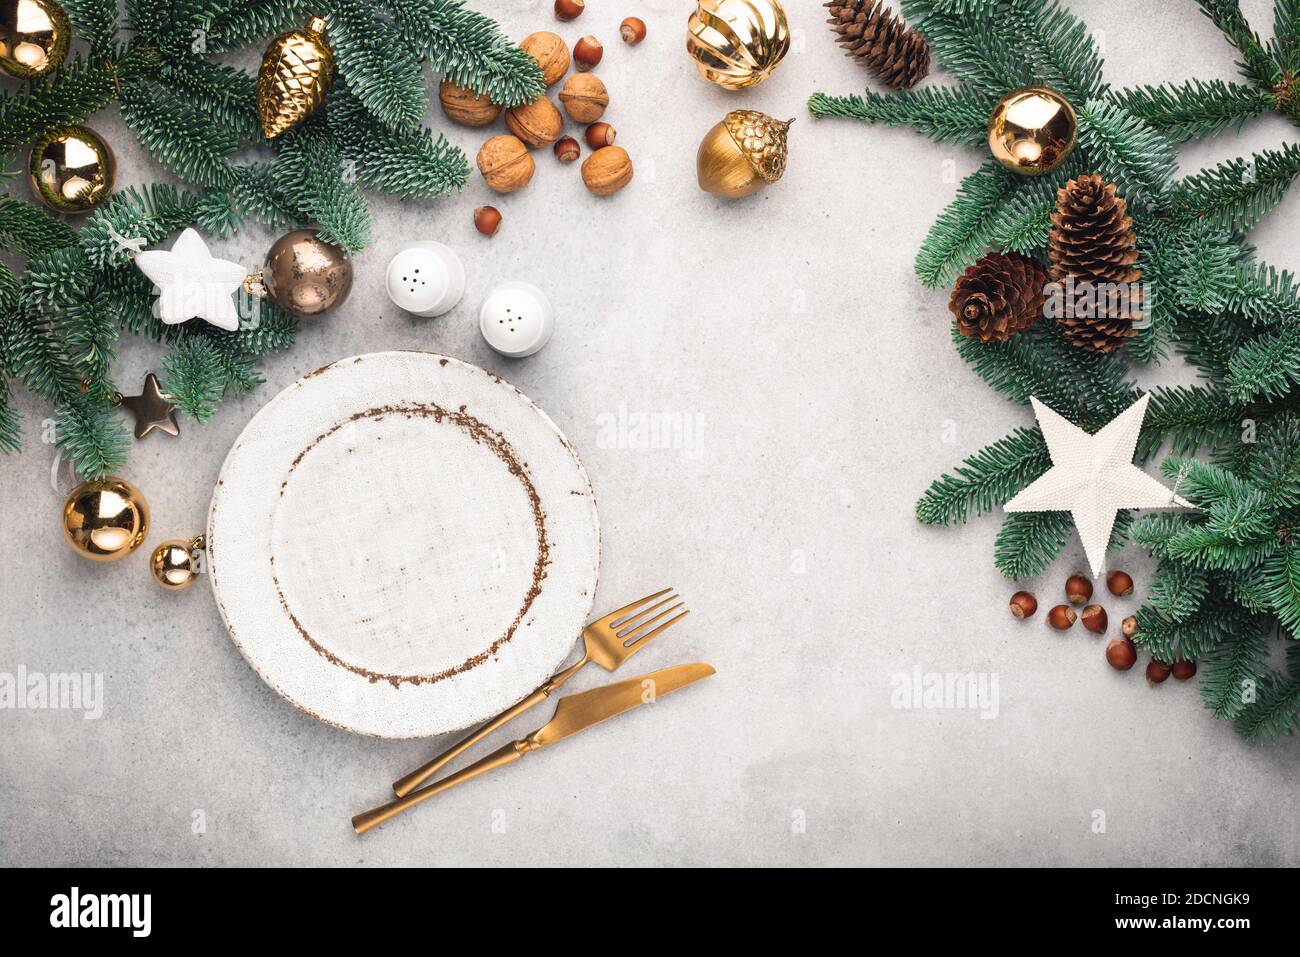 Christmas or New Year table setting mock up or frame with copy space for design elements and text. Top view. Empty plate, cutlery, fir tree and Christ Stock Photo